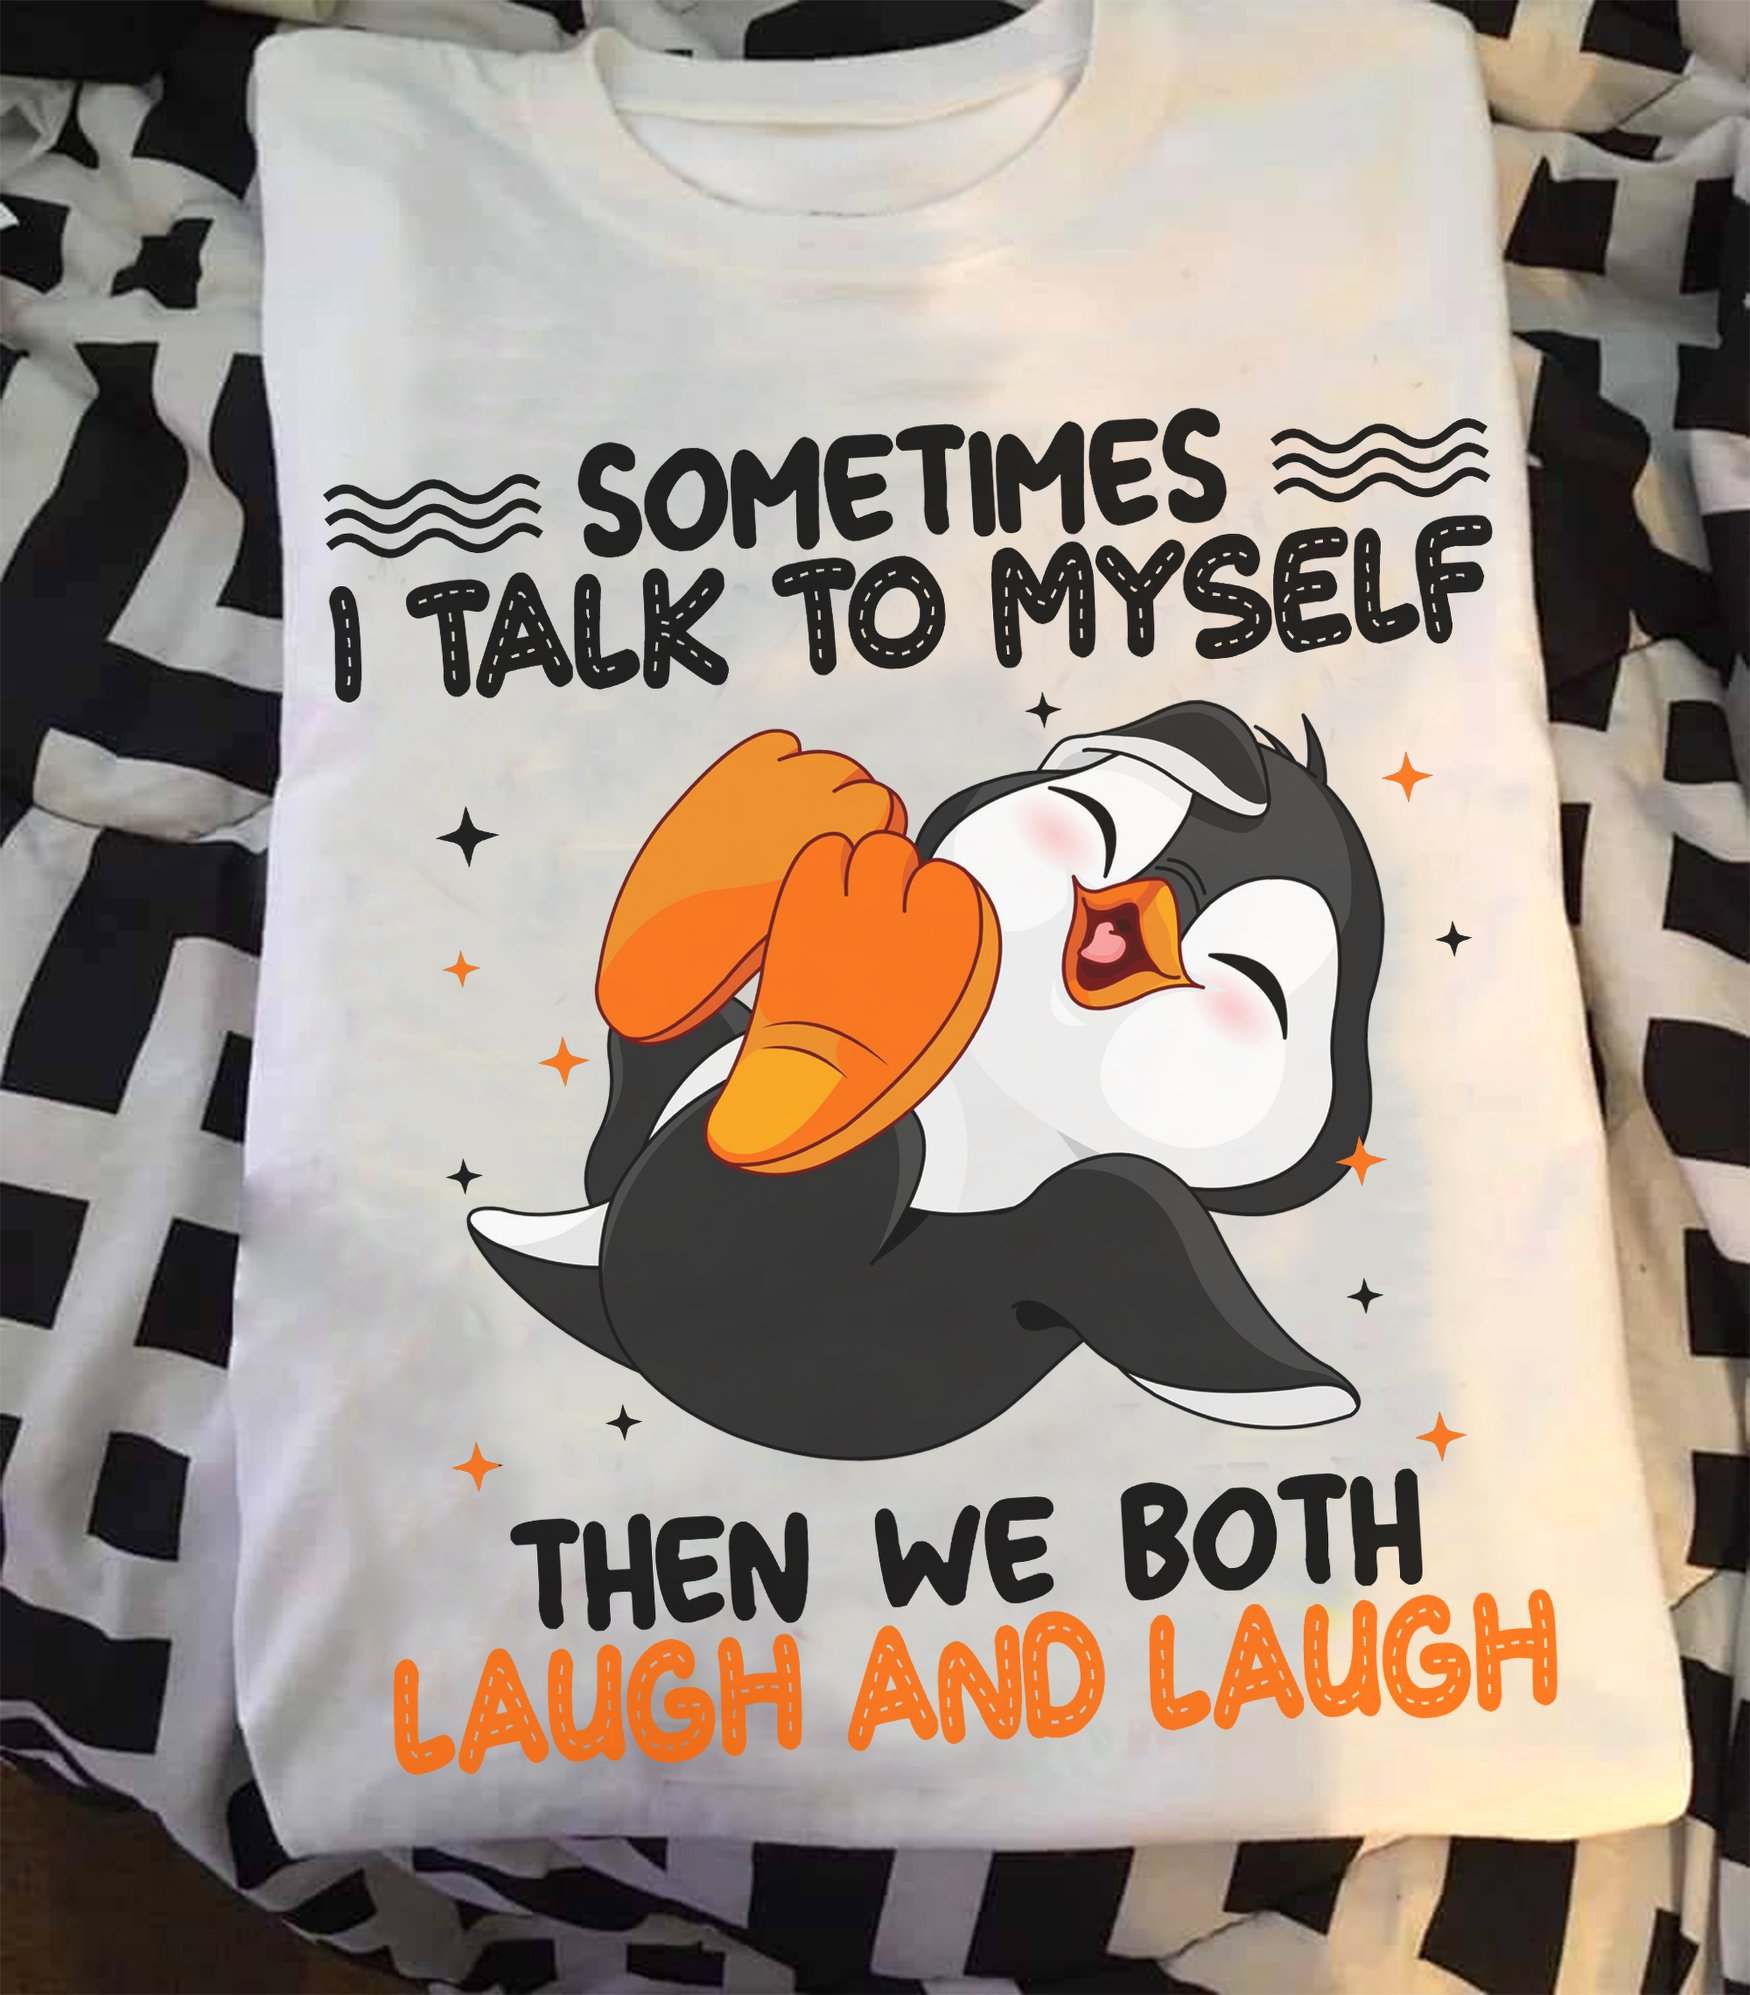 Sometimes I talk to my self then we both laugh and laugh - laughing penguin